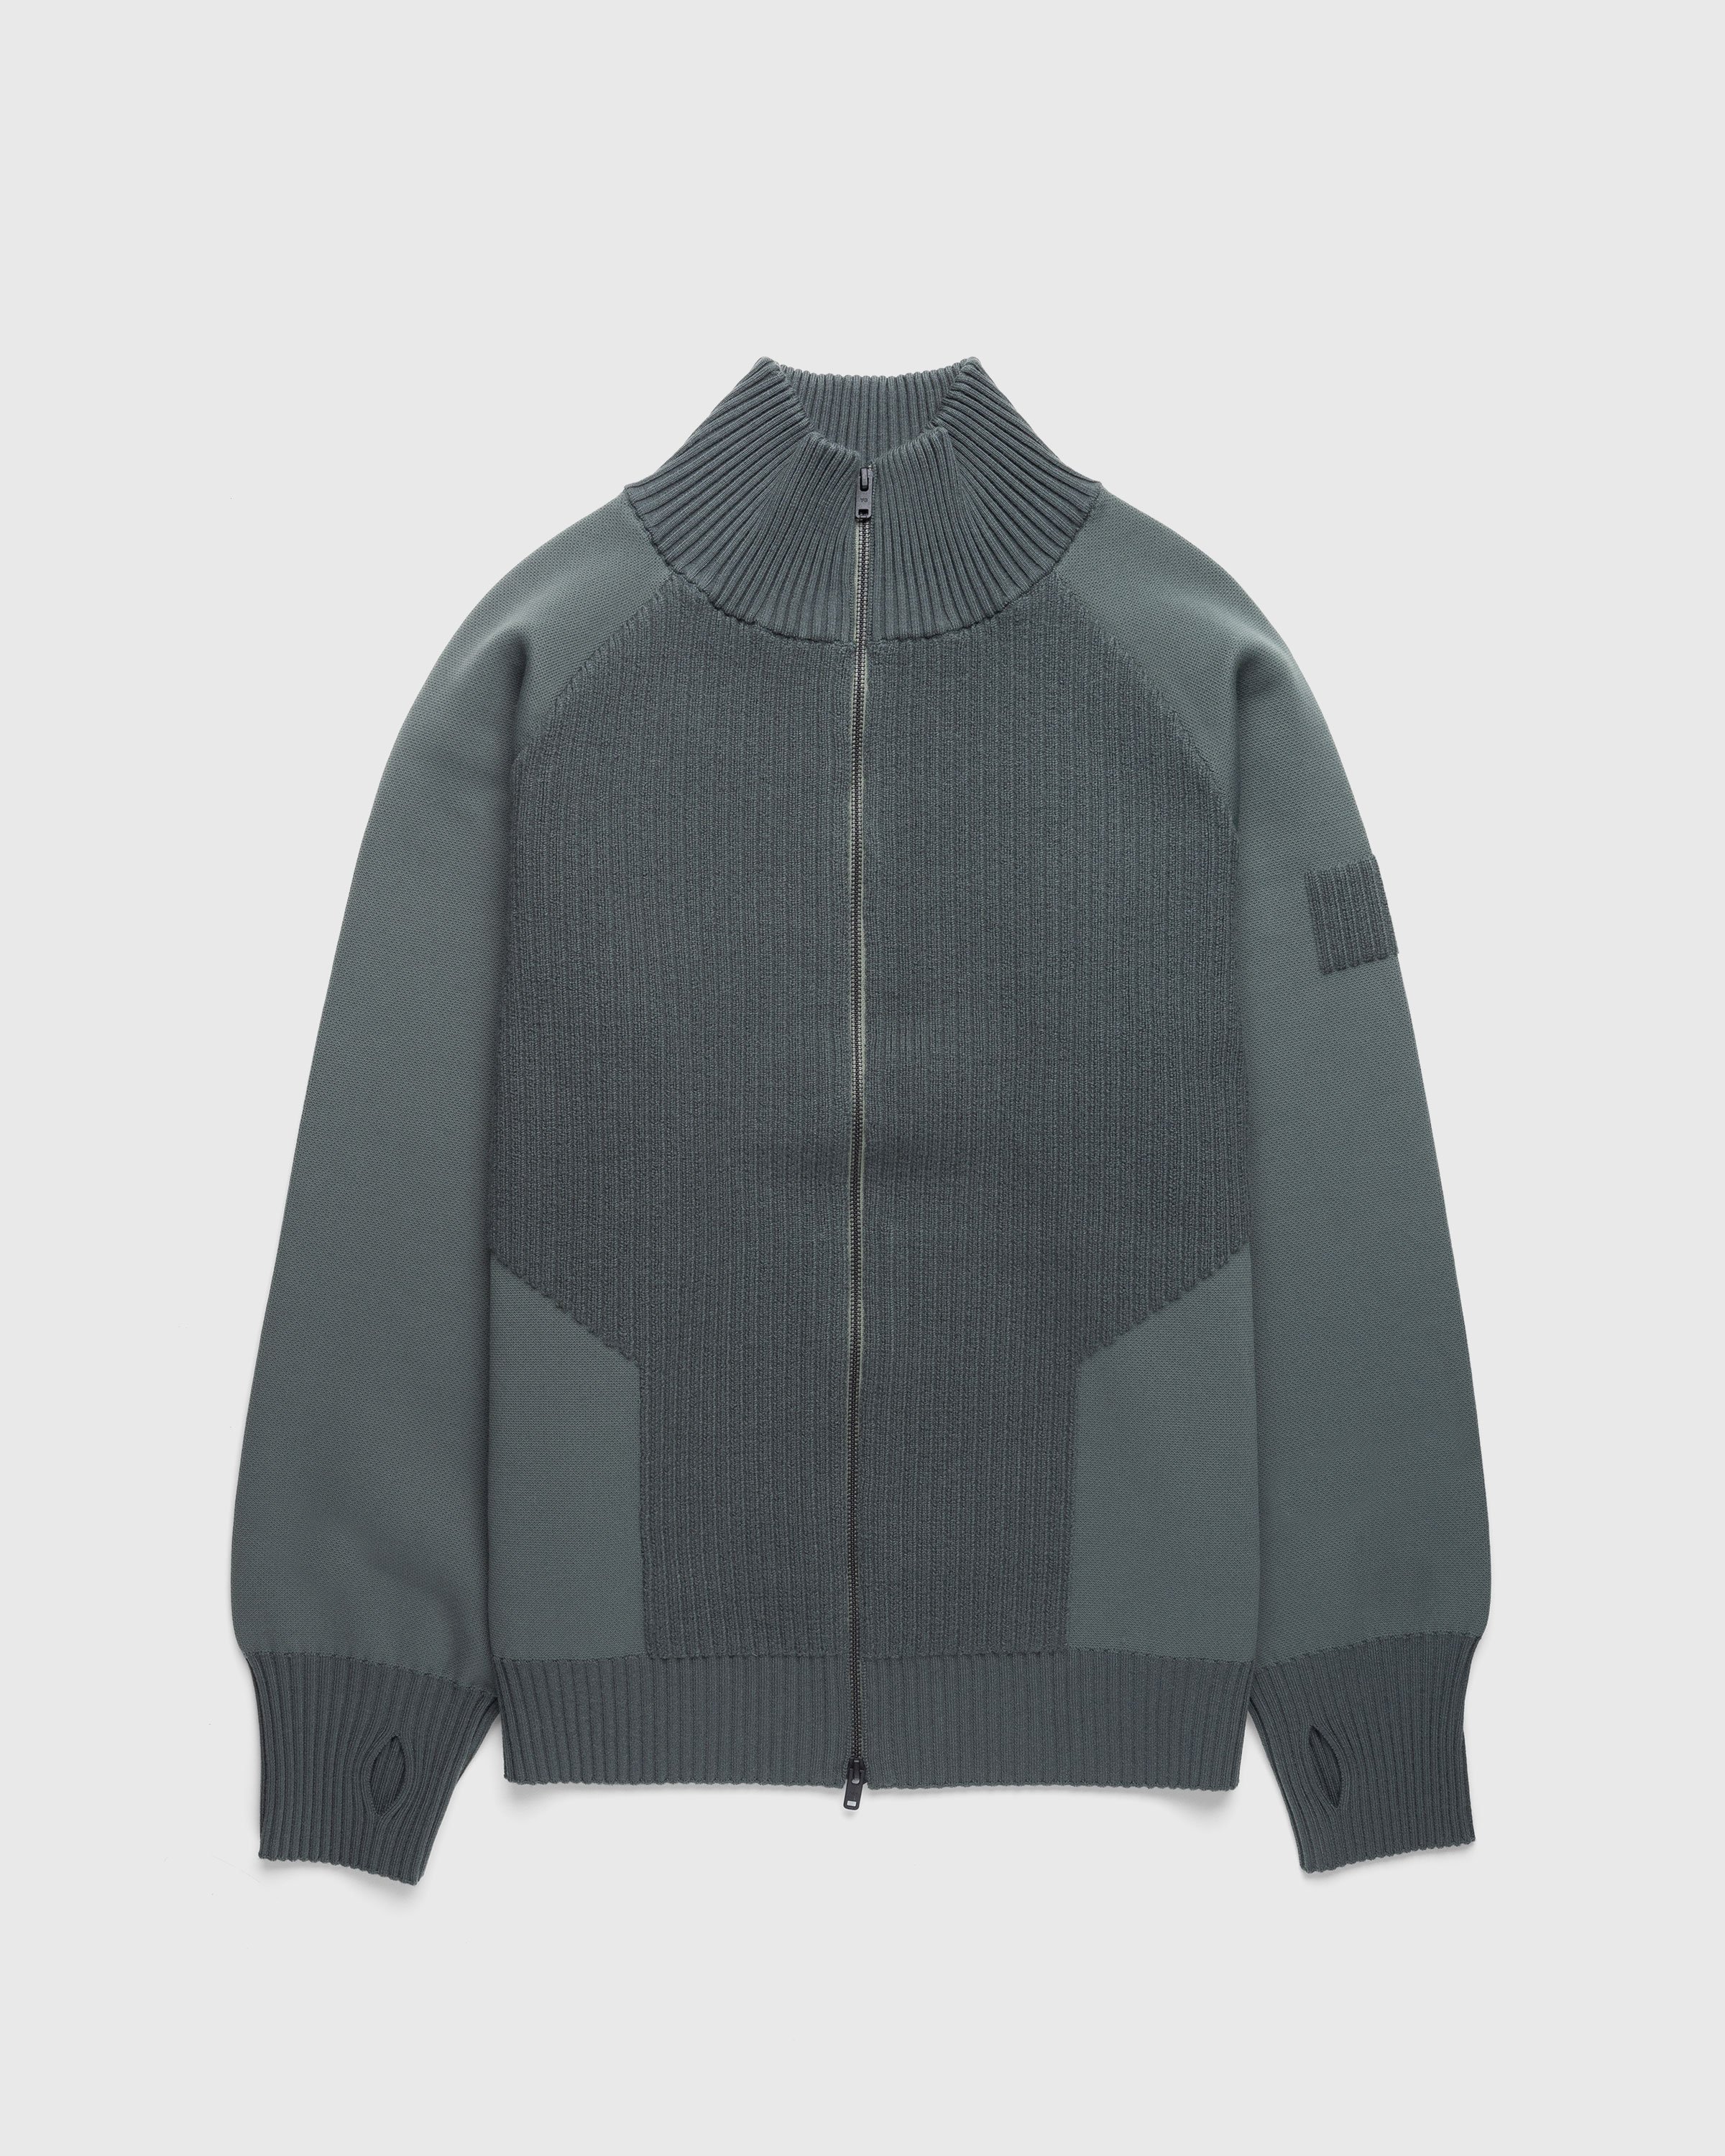 Y-3 - FZ Knit Sweater Stone Green - Clothing - Green - Image 1